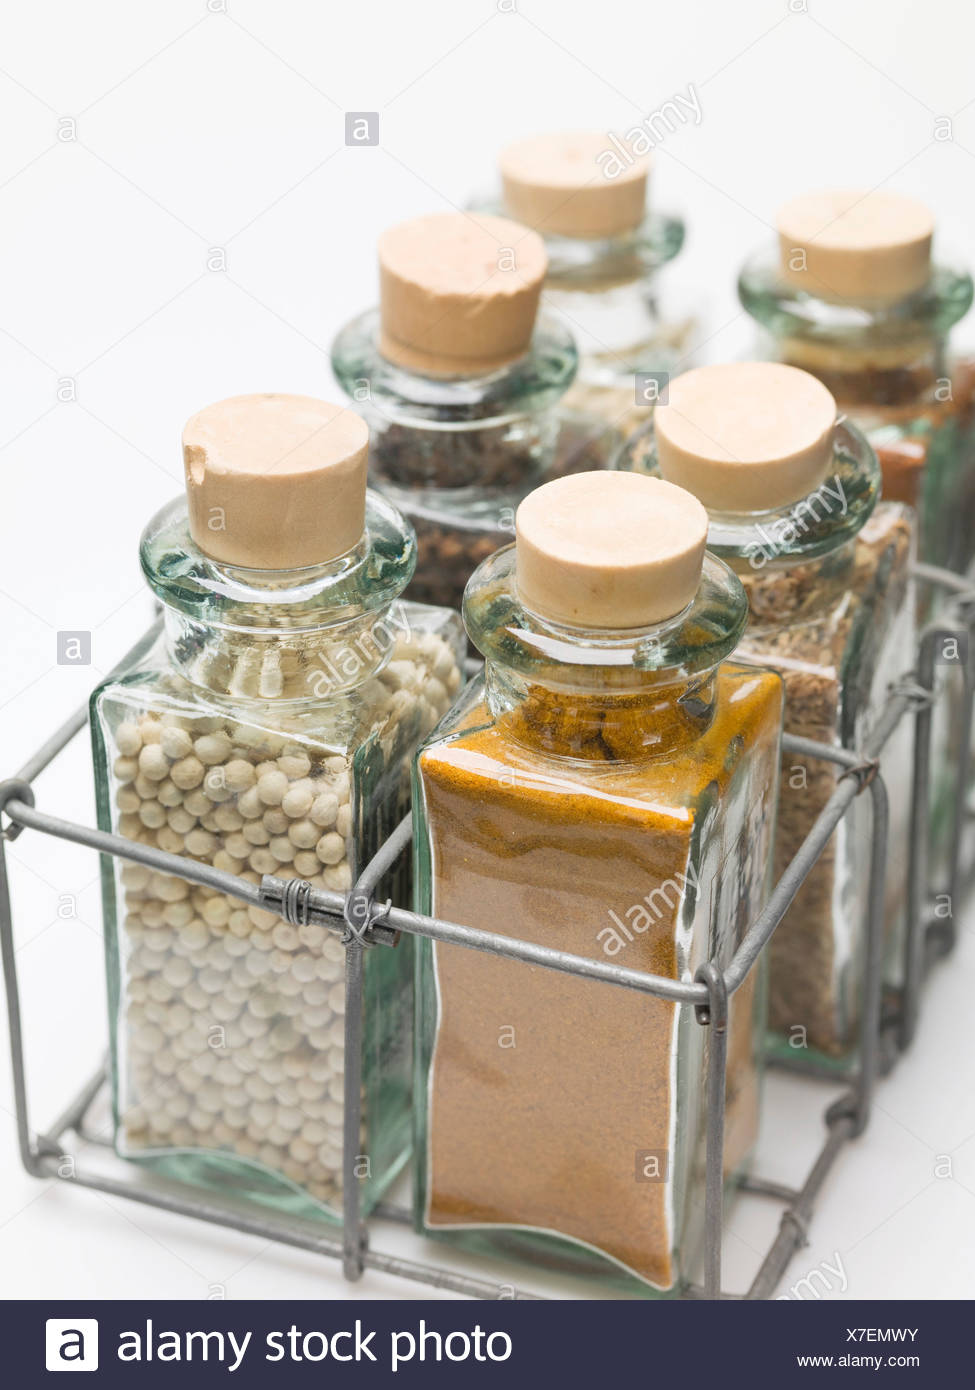 small glass bottles for spices